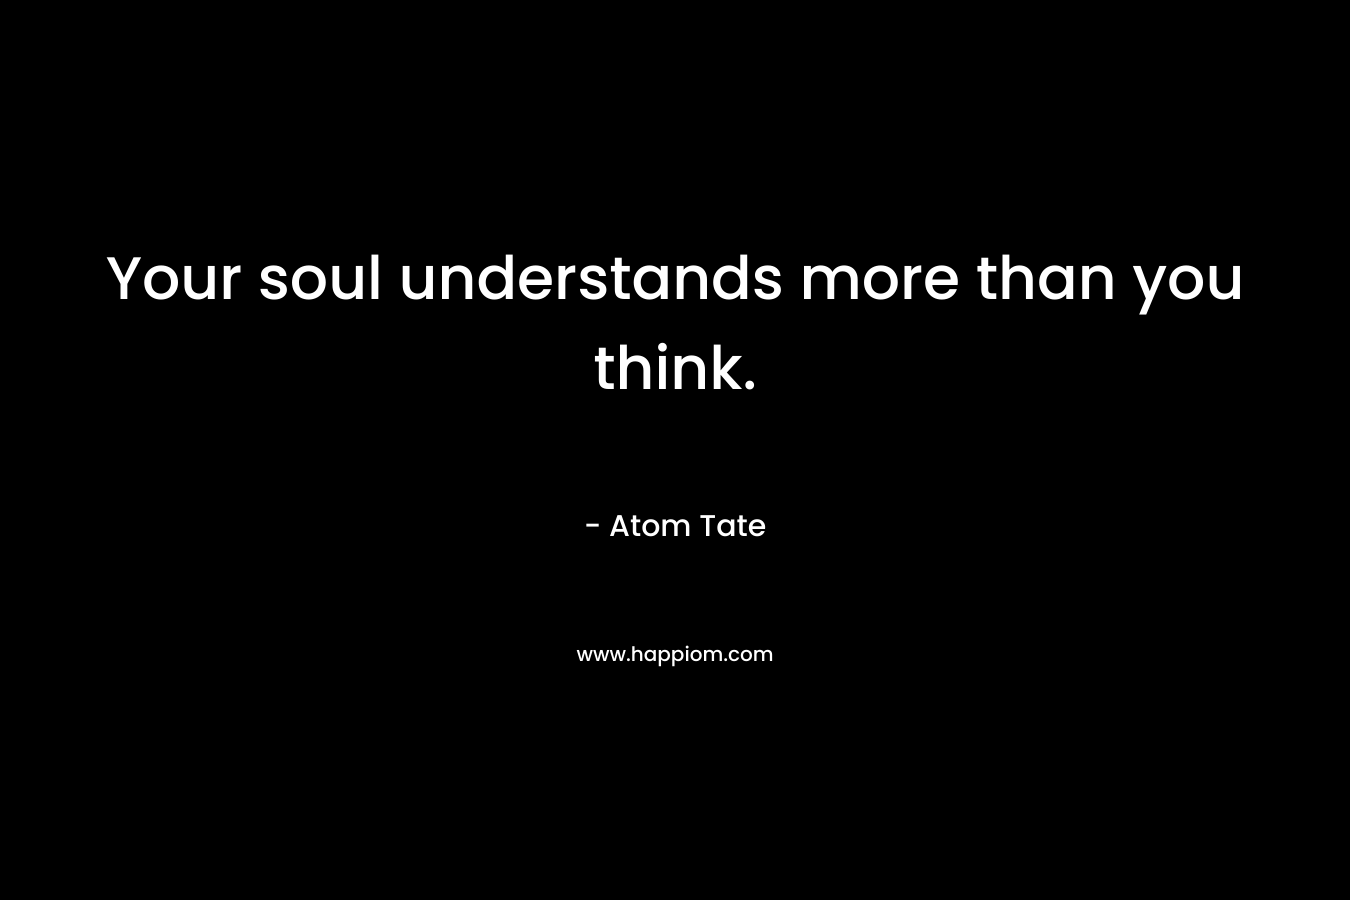 Your soul understands more than you think.